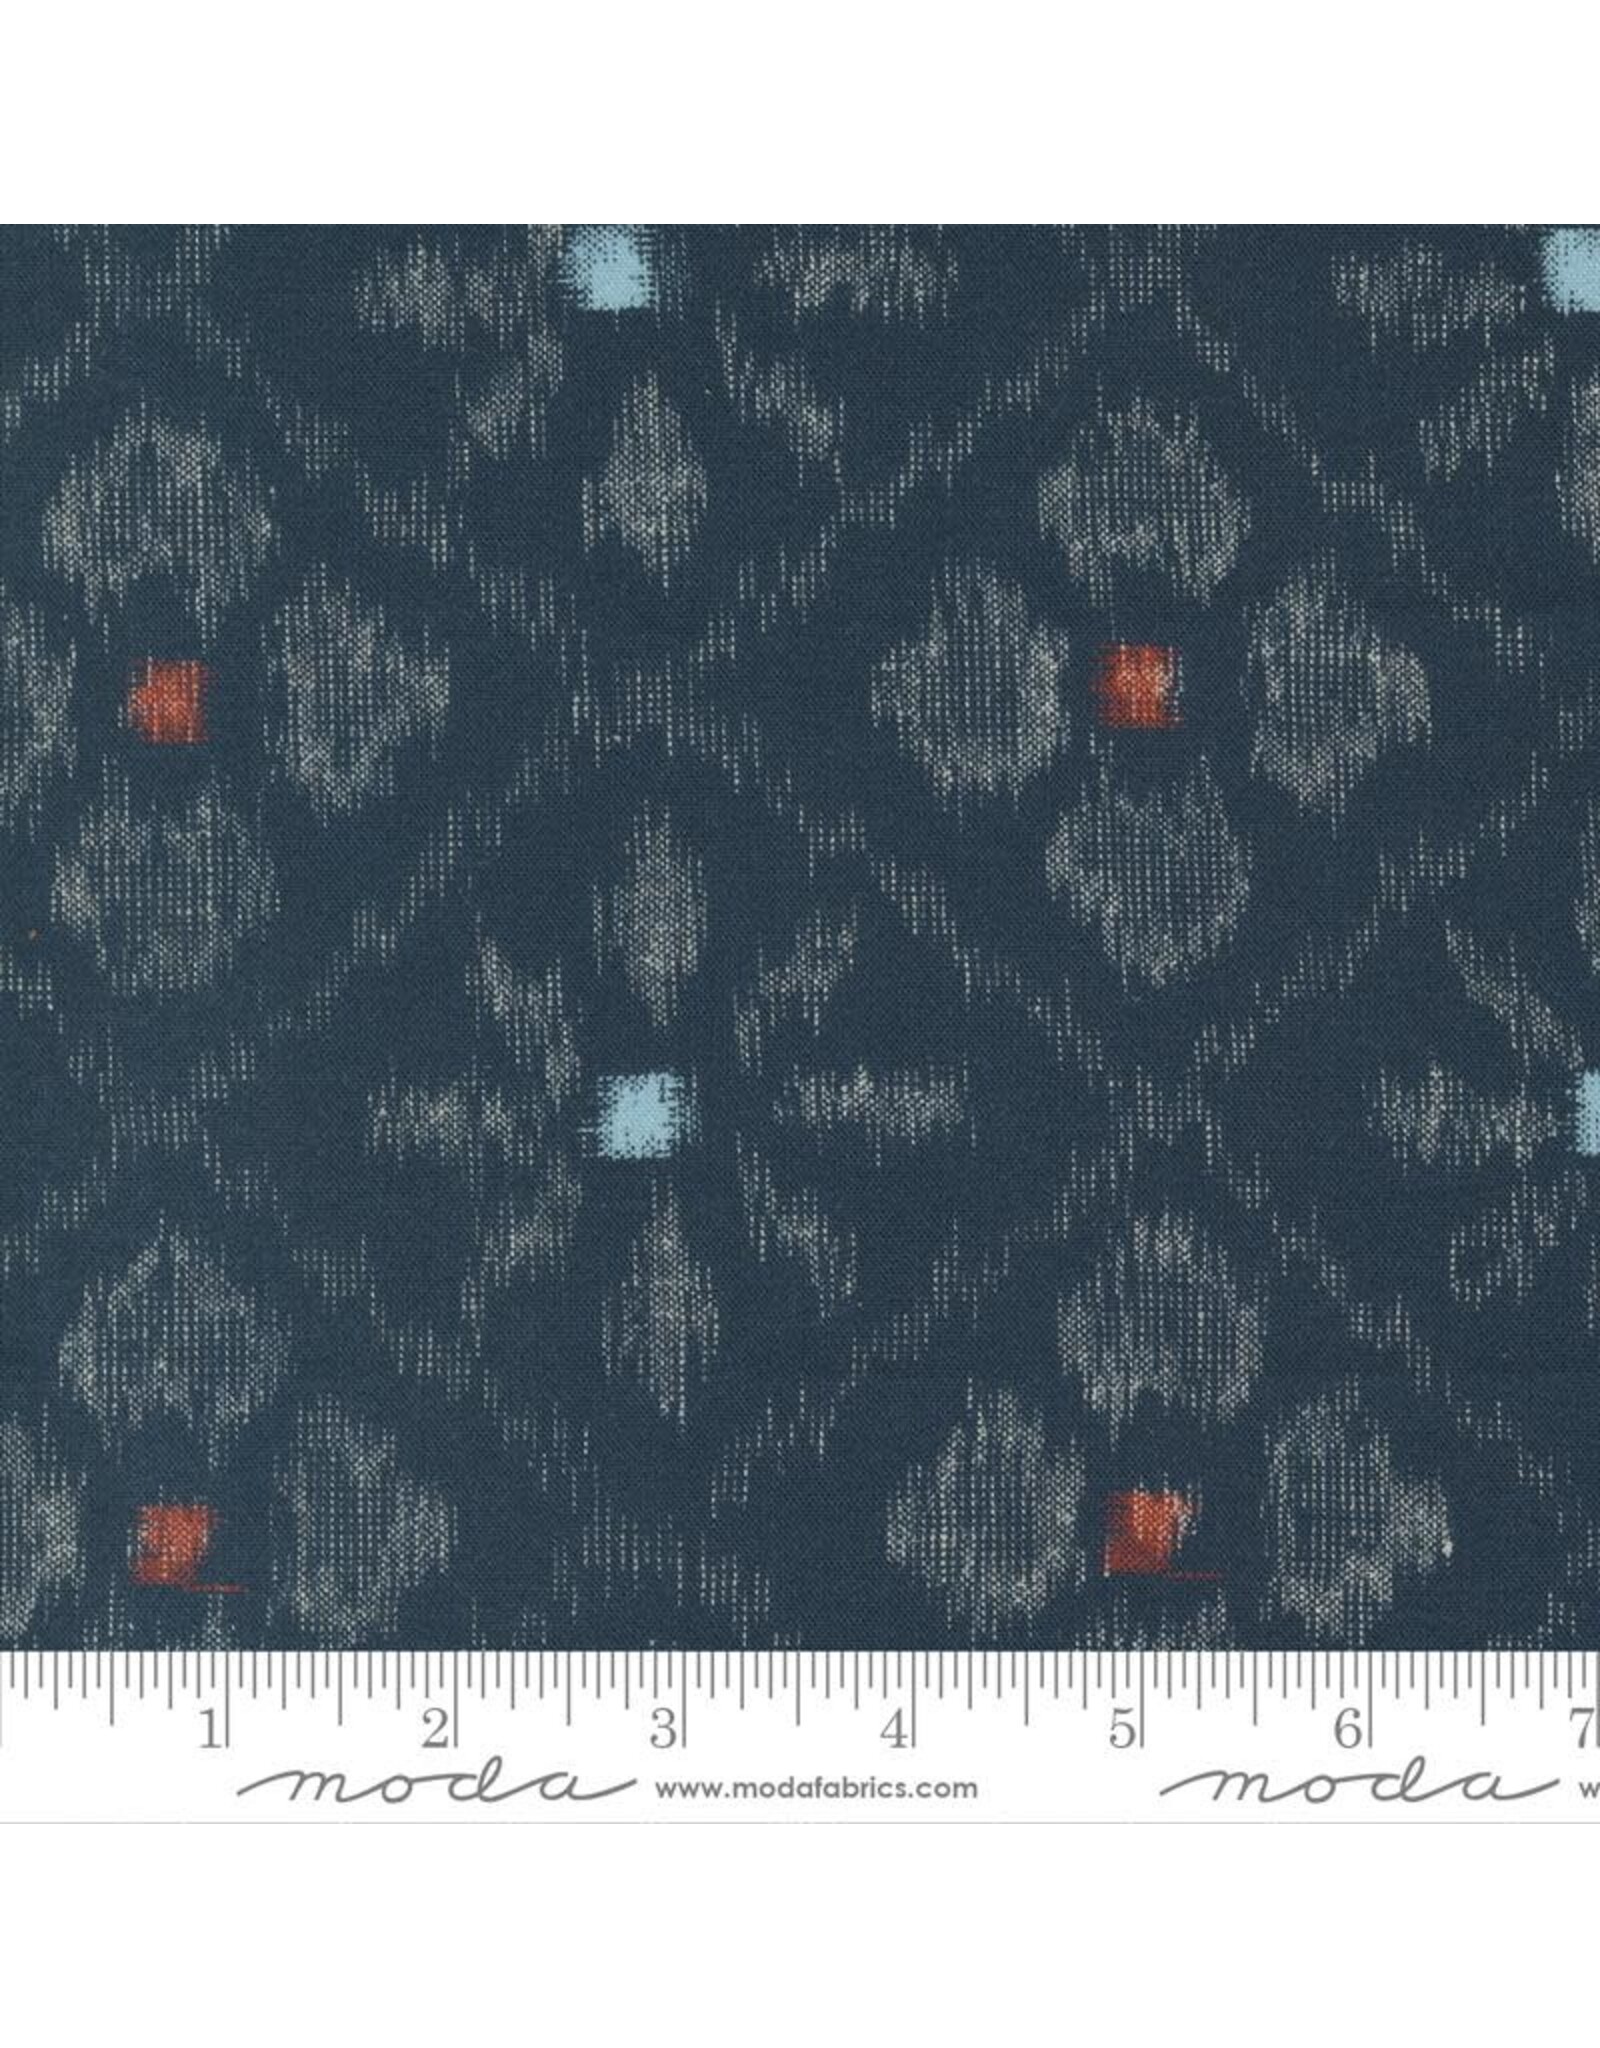 PD's Debbie Maddy Collection Indigo Blooming, Asagao Ikat in Midnight, Dinner Napkin